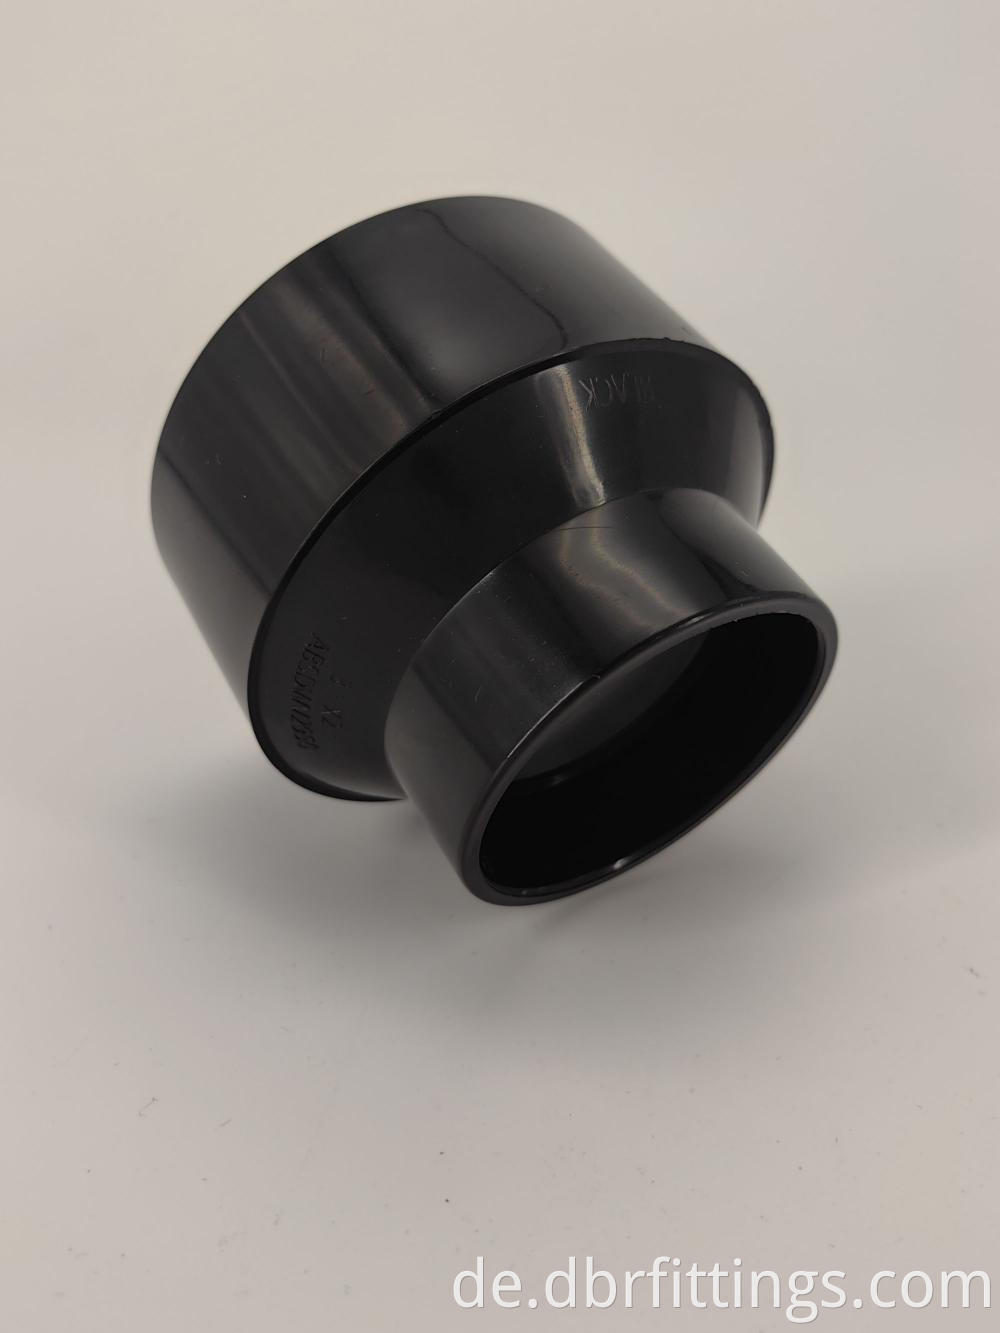 ABS fittings PIPE INCREASER and REDUCER